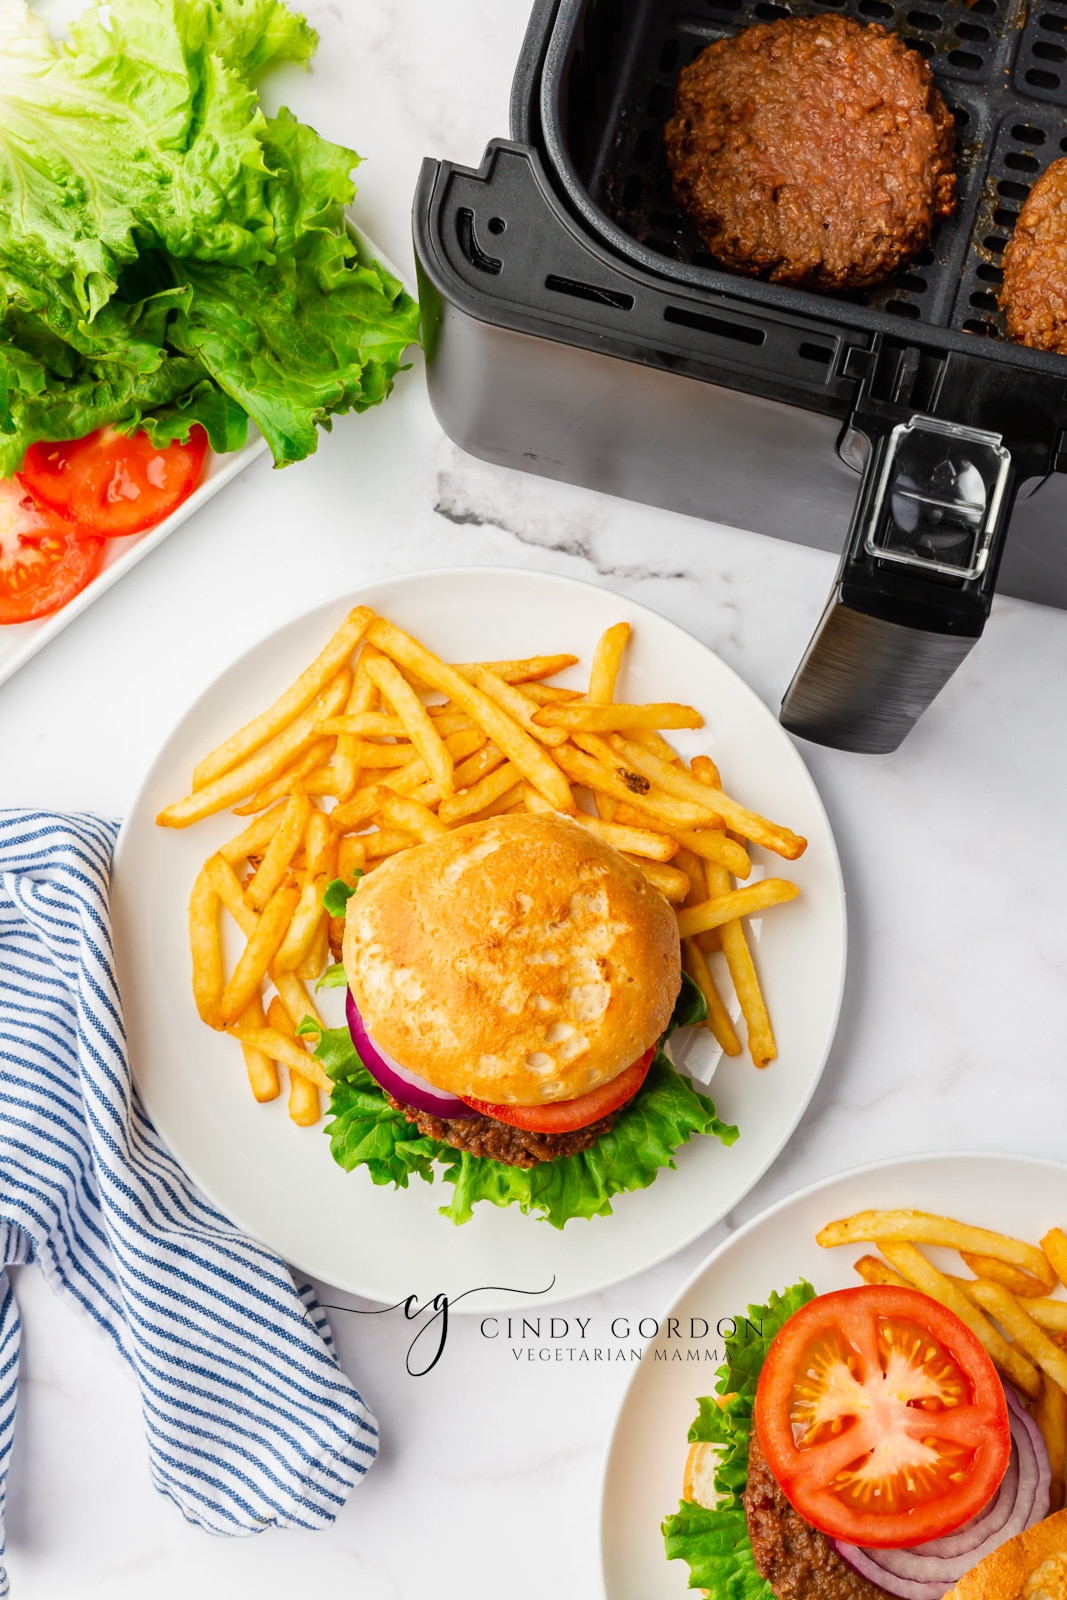 black air fryer basket. White plate with cooked fries and a bun with beyond burger air fryer with lettuce, tomato onion